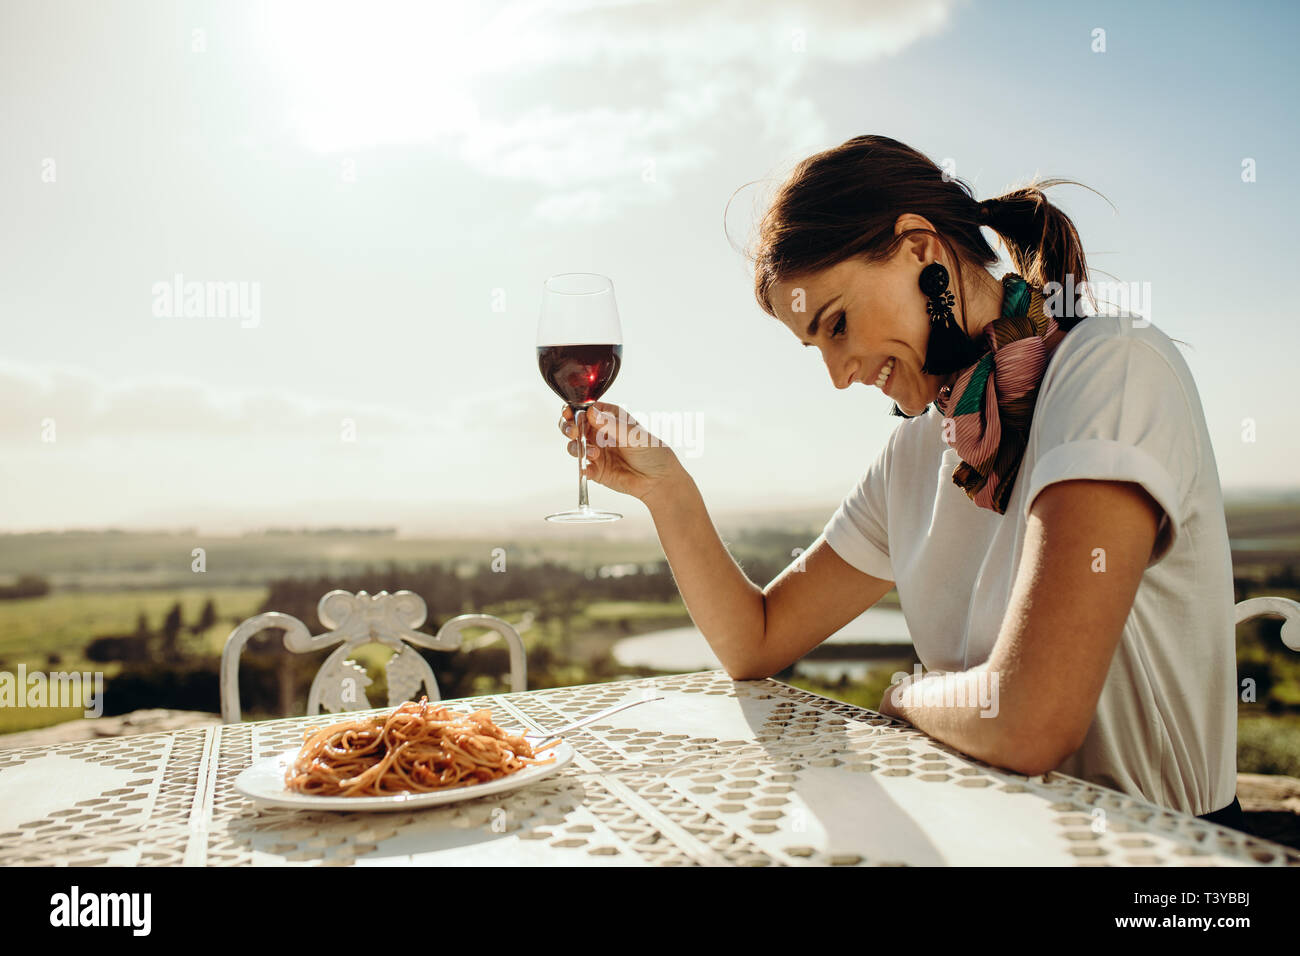 Close up of a woman dining out sitting at a restaurant table. Side view of a smiling woman sitting at the table looking down with a glass of red wine  Stock Photo